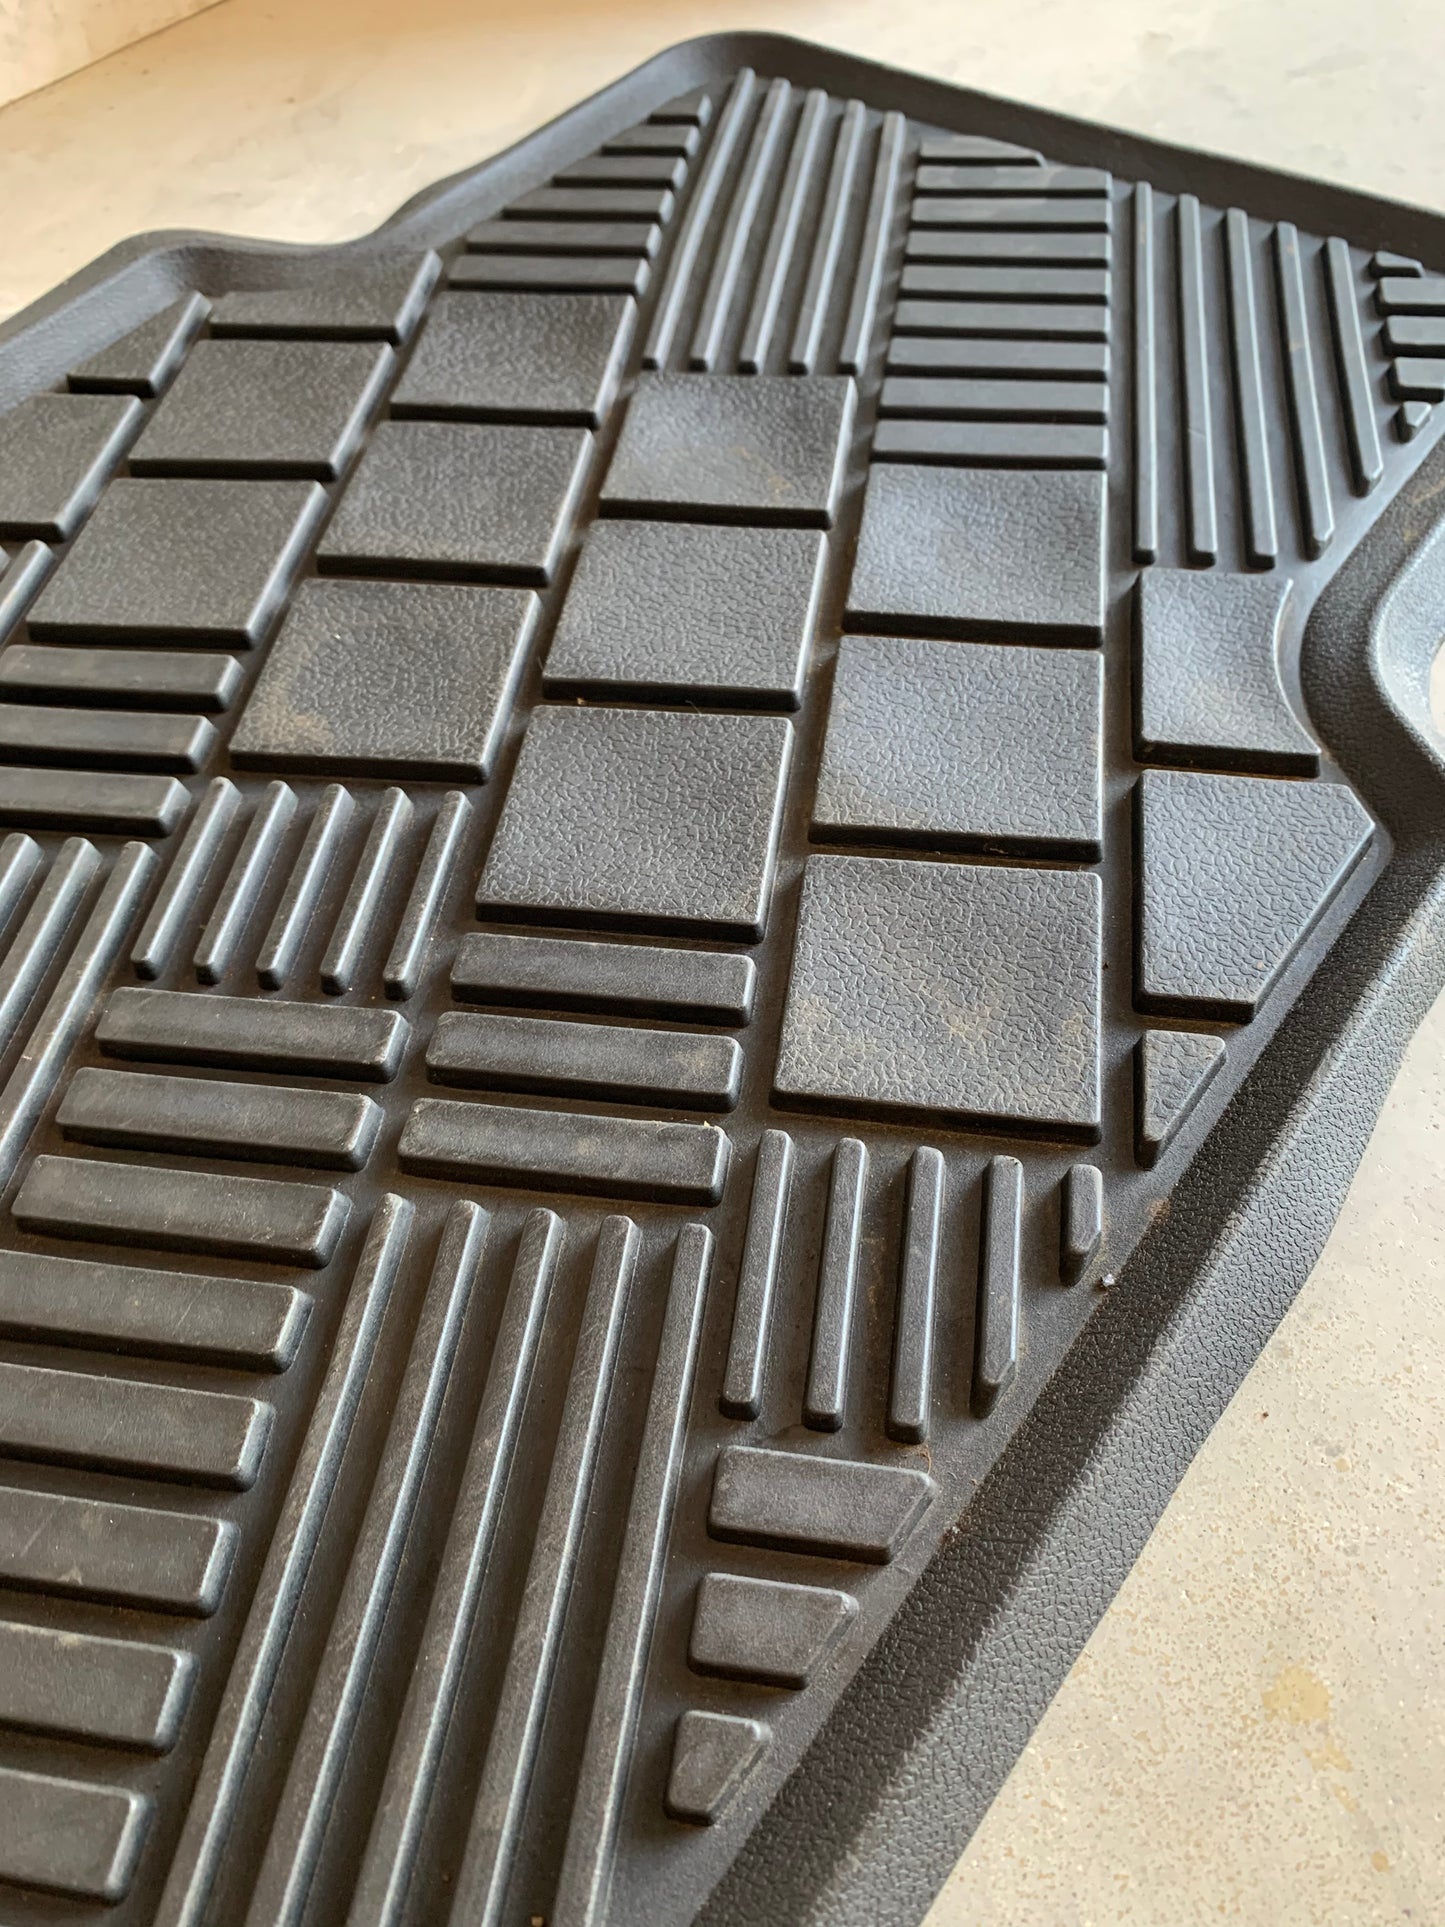 Clean rubber floor mats after treating with Blitz